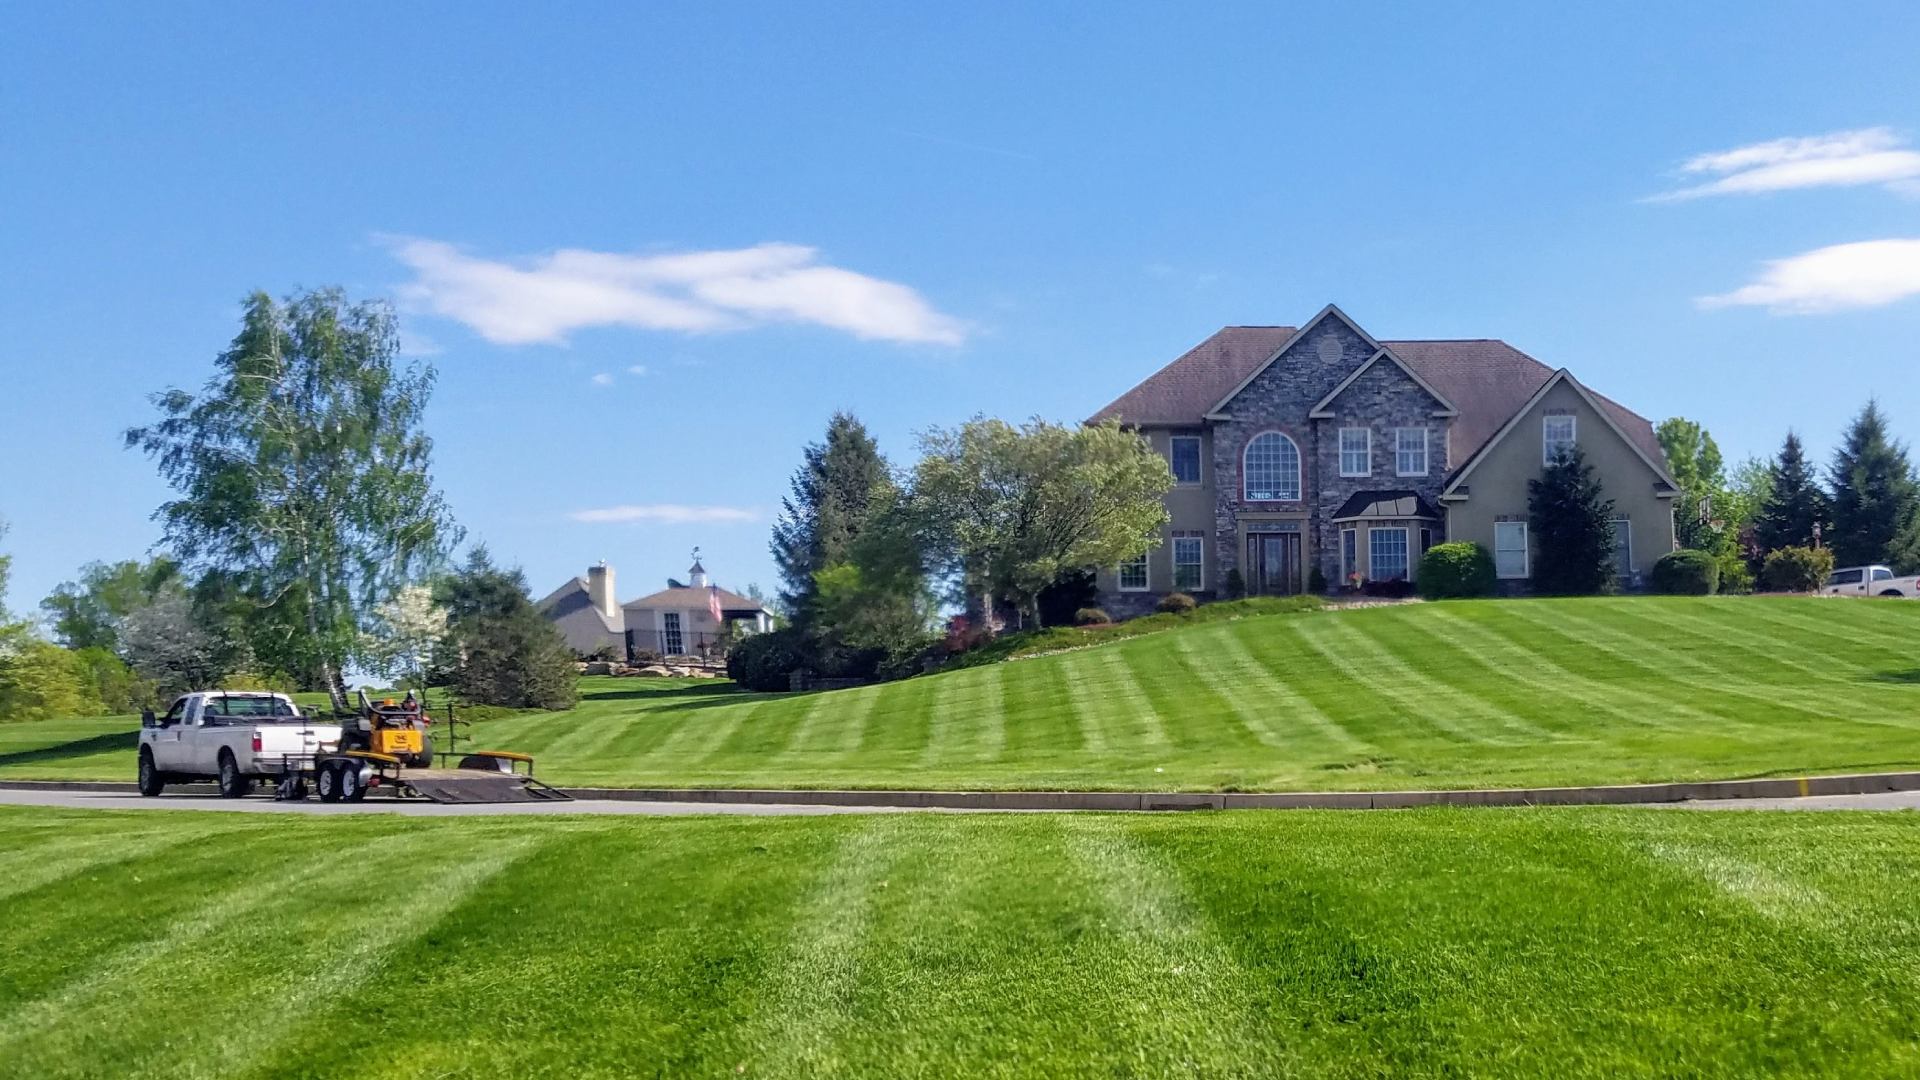 Lawn mowing patterns for large home front in Center Valley, PA.